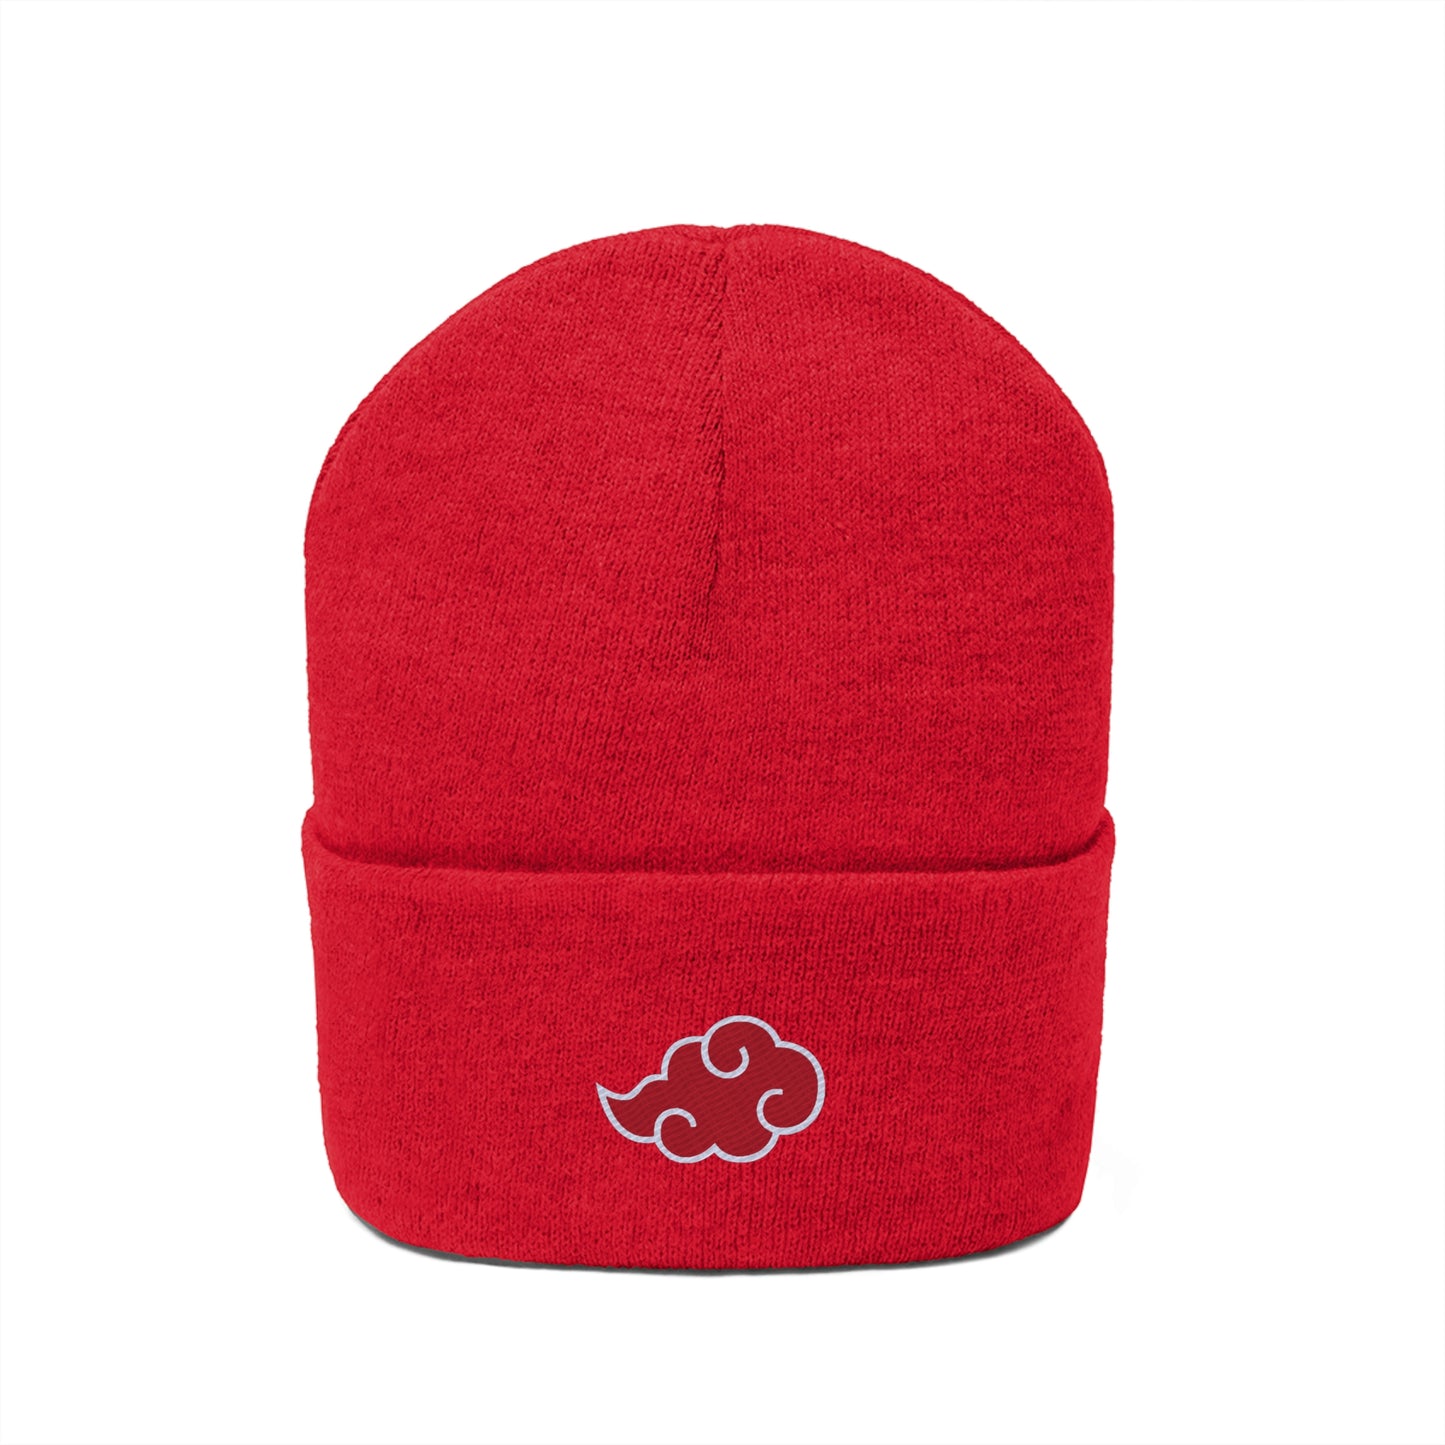 Anime Cloud Embroidered Beanie red white